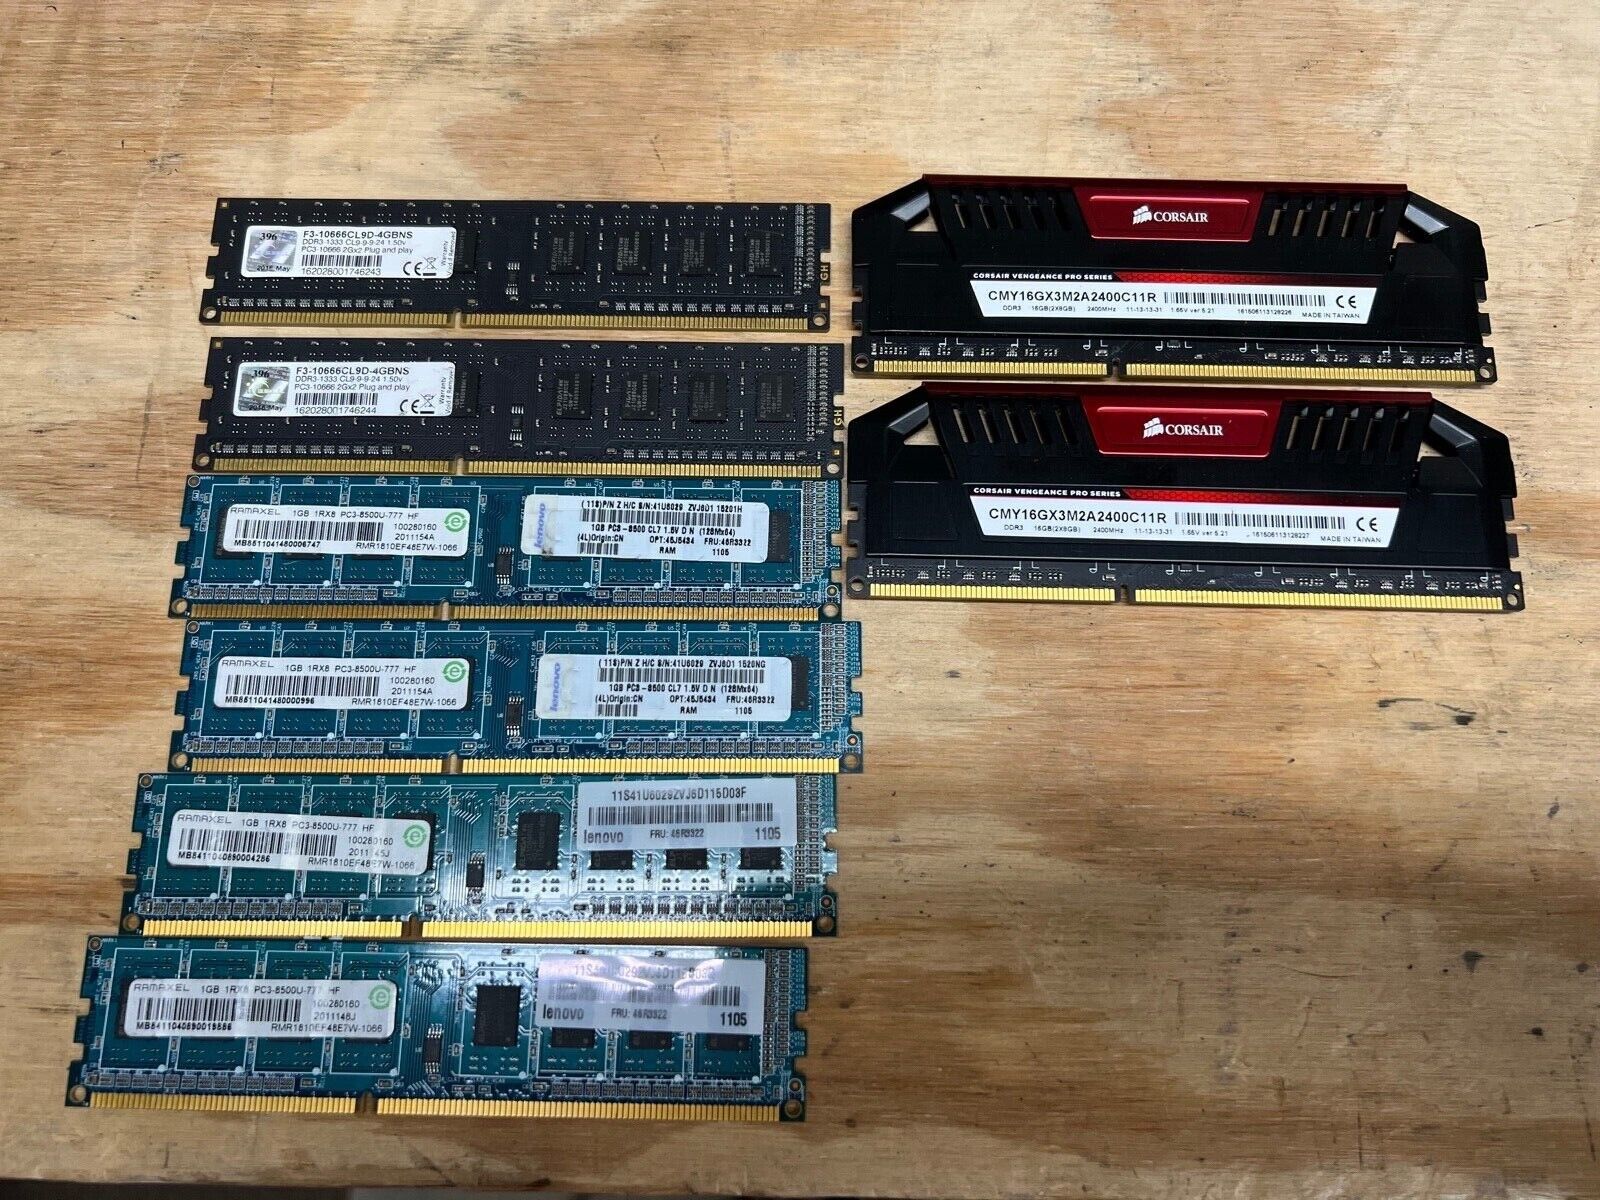 Lot of 8 RAM Modules DDR3 8GB x 2 and other Memory - Corsair See pictures, SALE